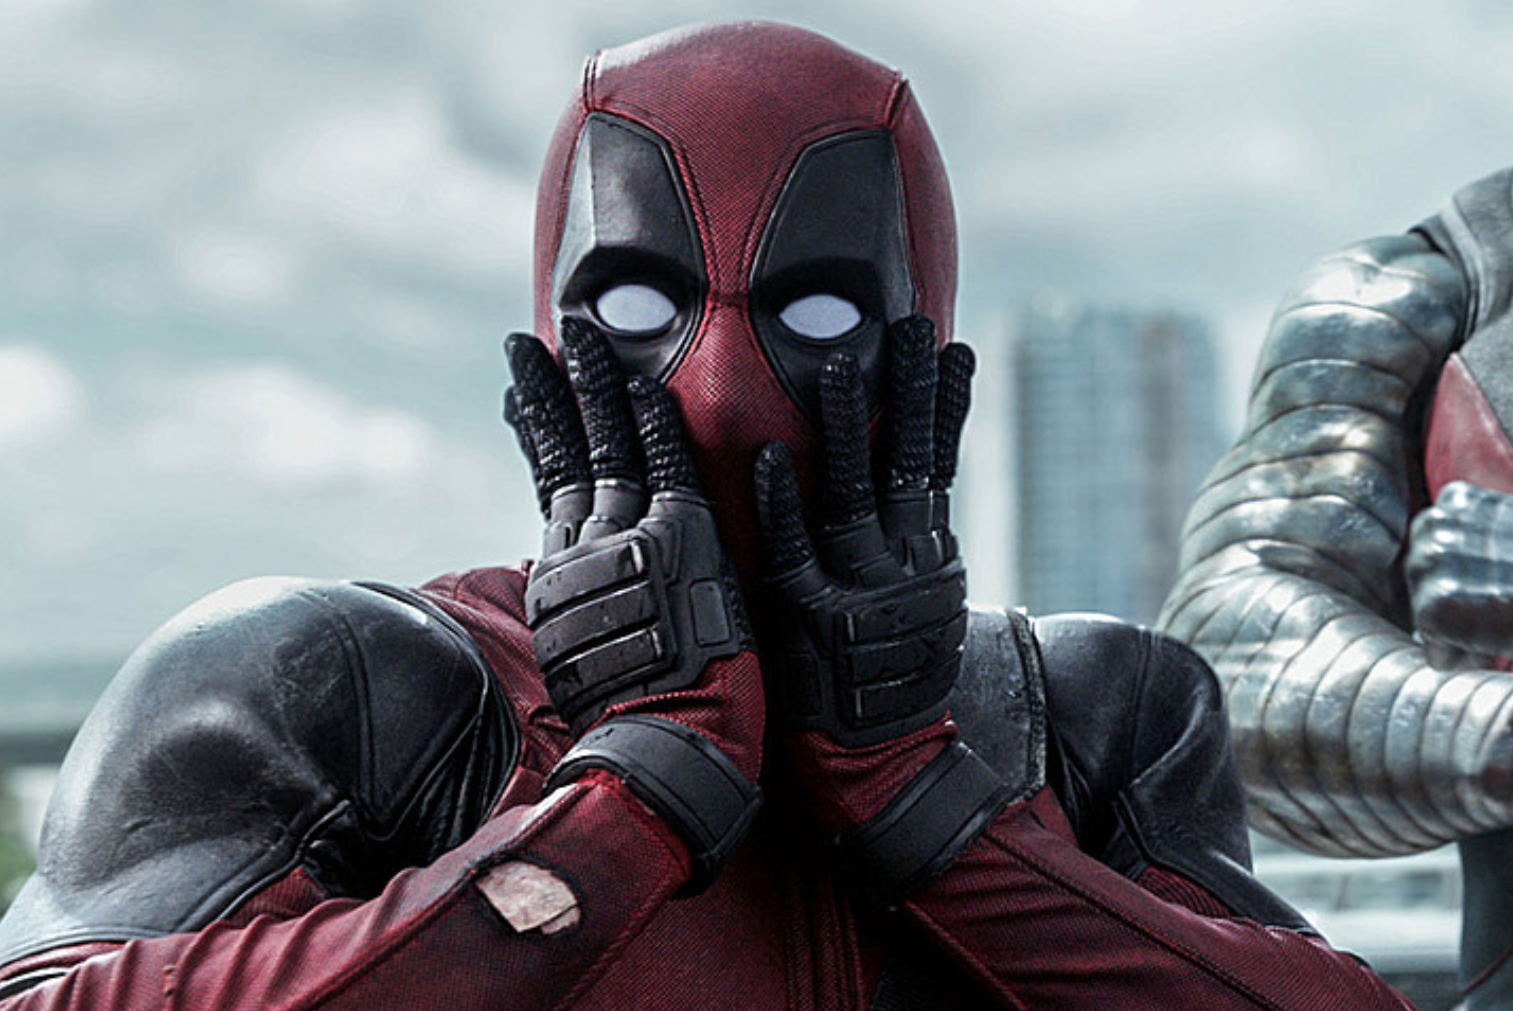 Deadpool 2 gets a director, and you might not know who he is